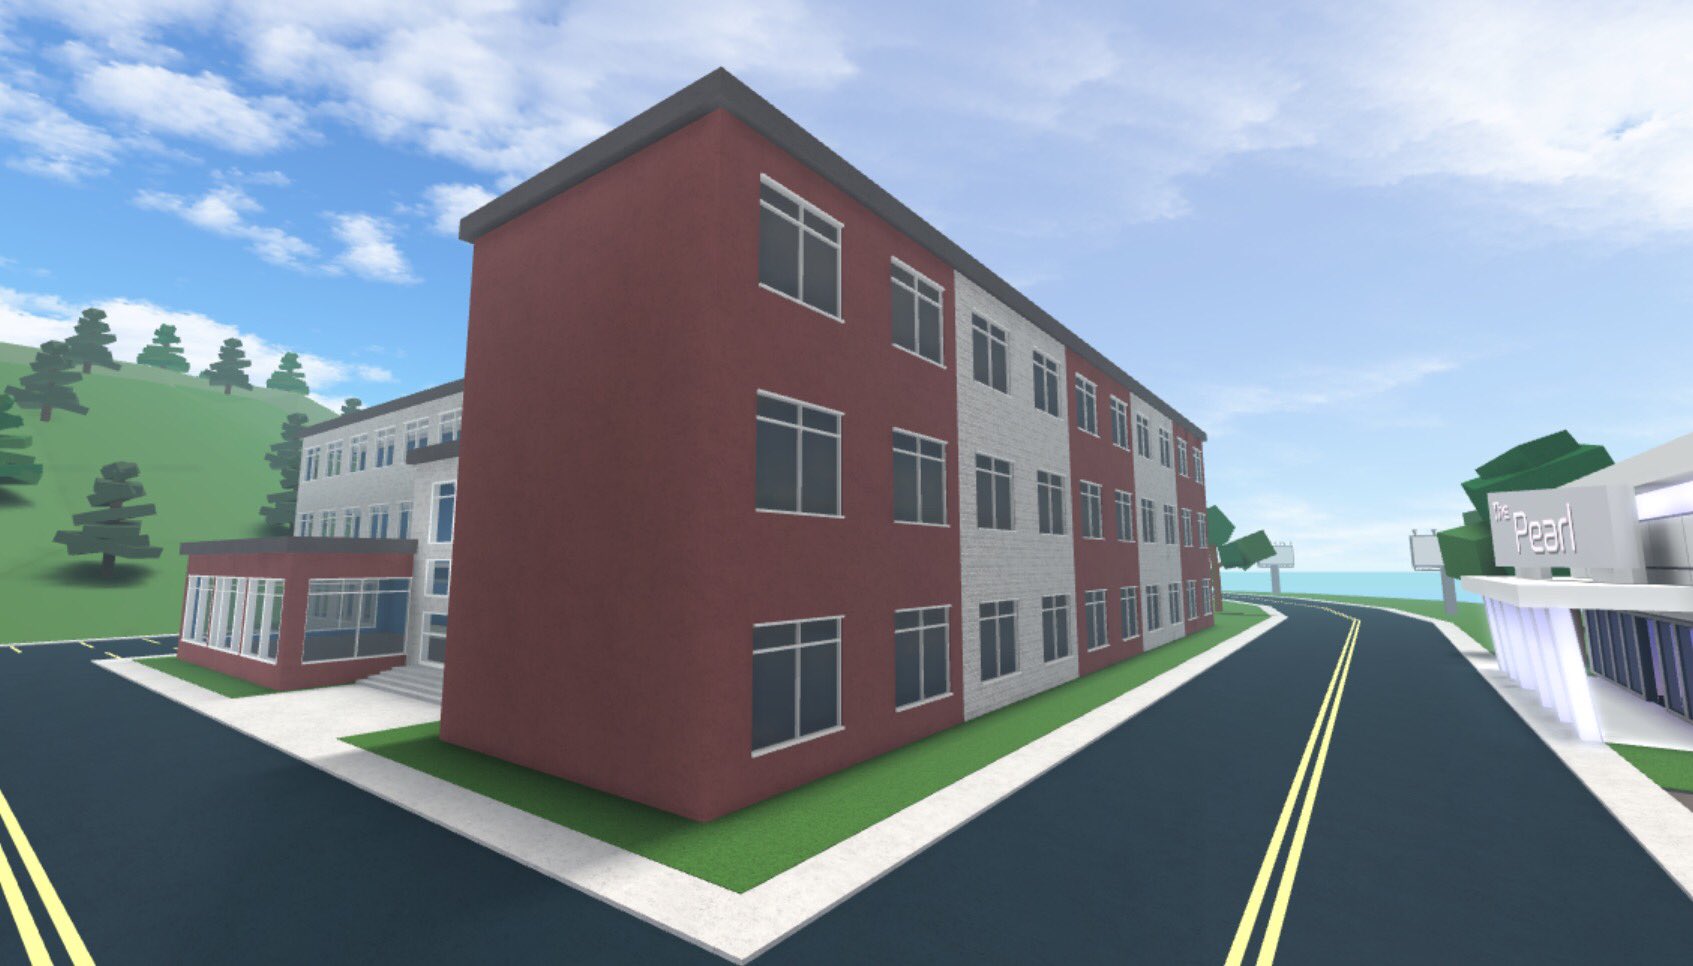 Build a high detailed roblox building for you by Dylxnn